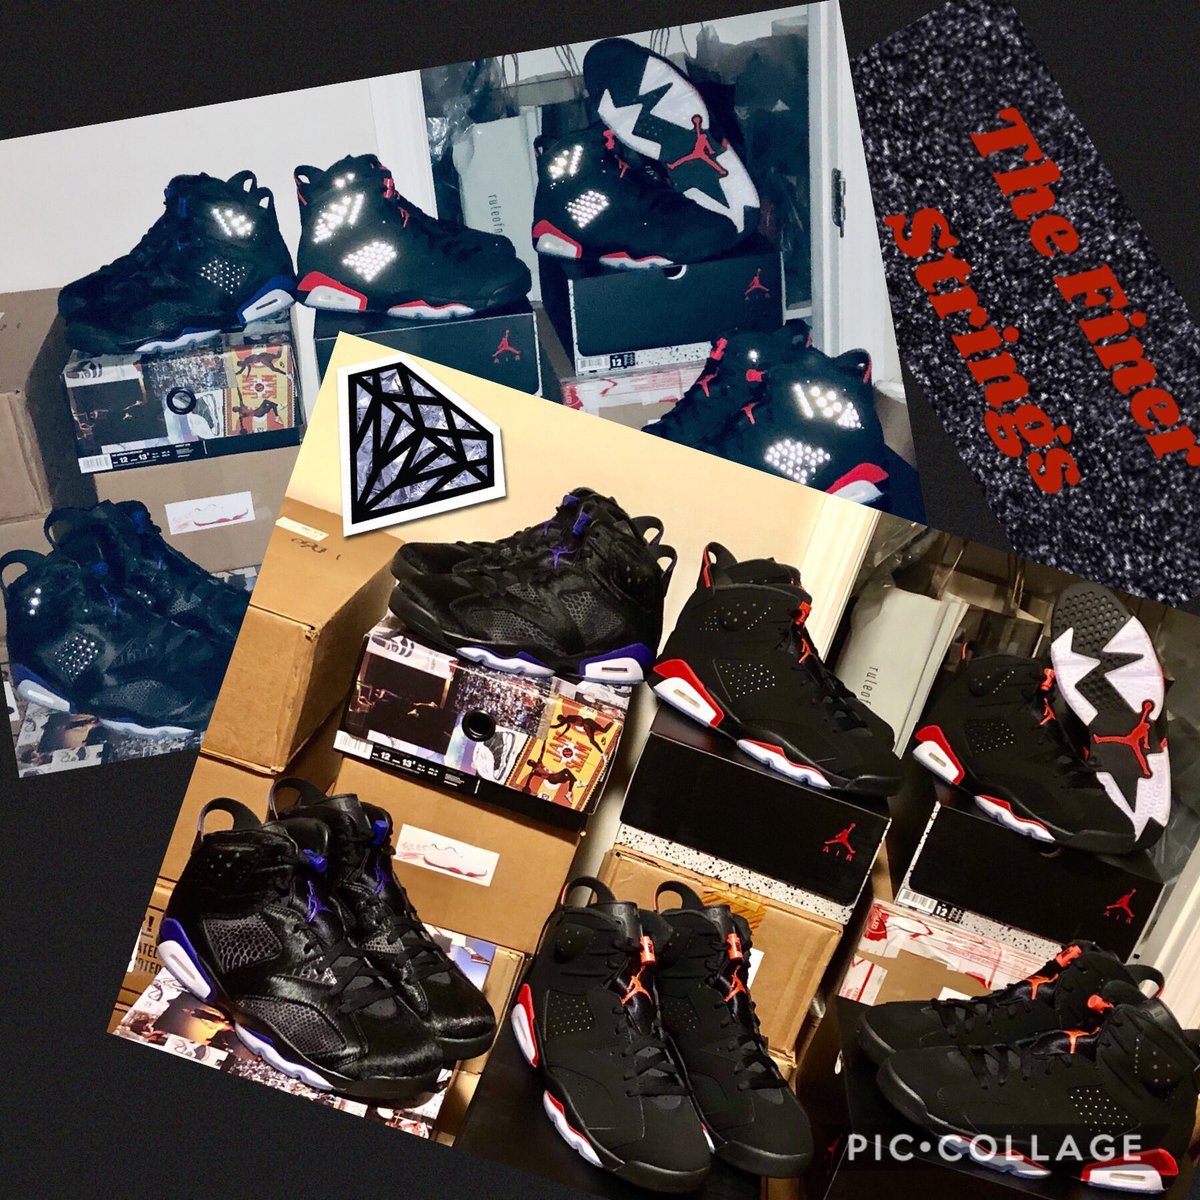 Jordan 6 Infrared Black (2019)   Jordan 6 Social Status                      You can wear one but you have to sell one!! Which one would you pick?!?#sneakernews #sneakers #sneakerhead #limited #hype #wins #SneakerScouts #jordan6 #shoesaddict #FromIdeaToReality #MondayMotivation